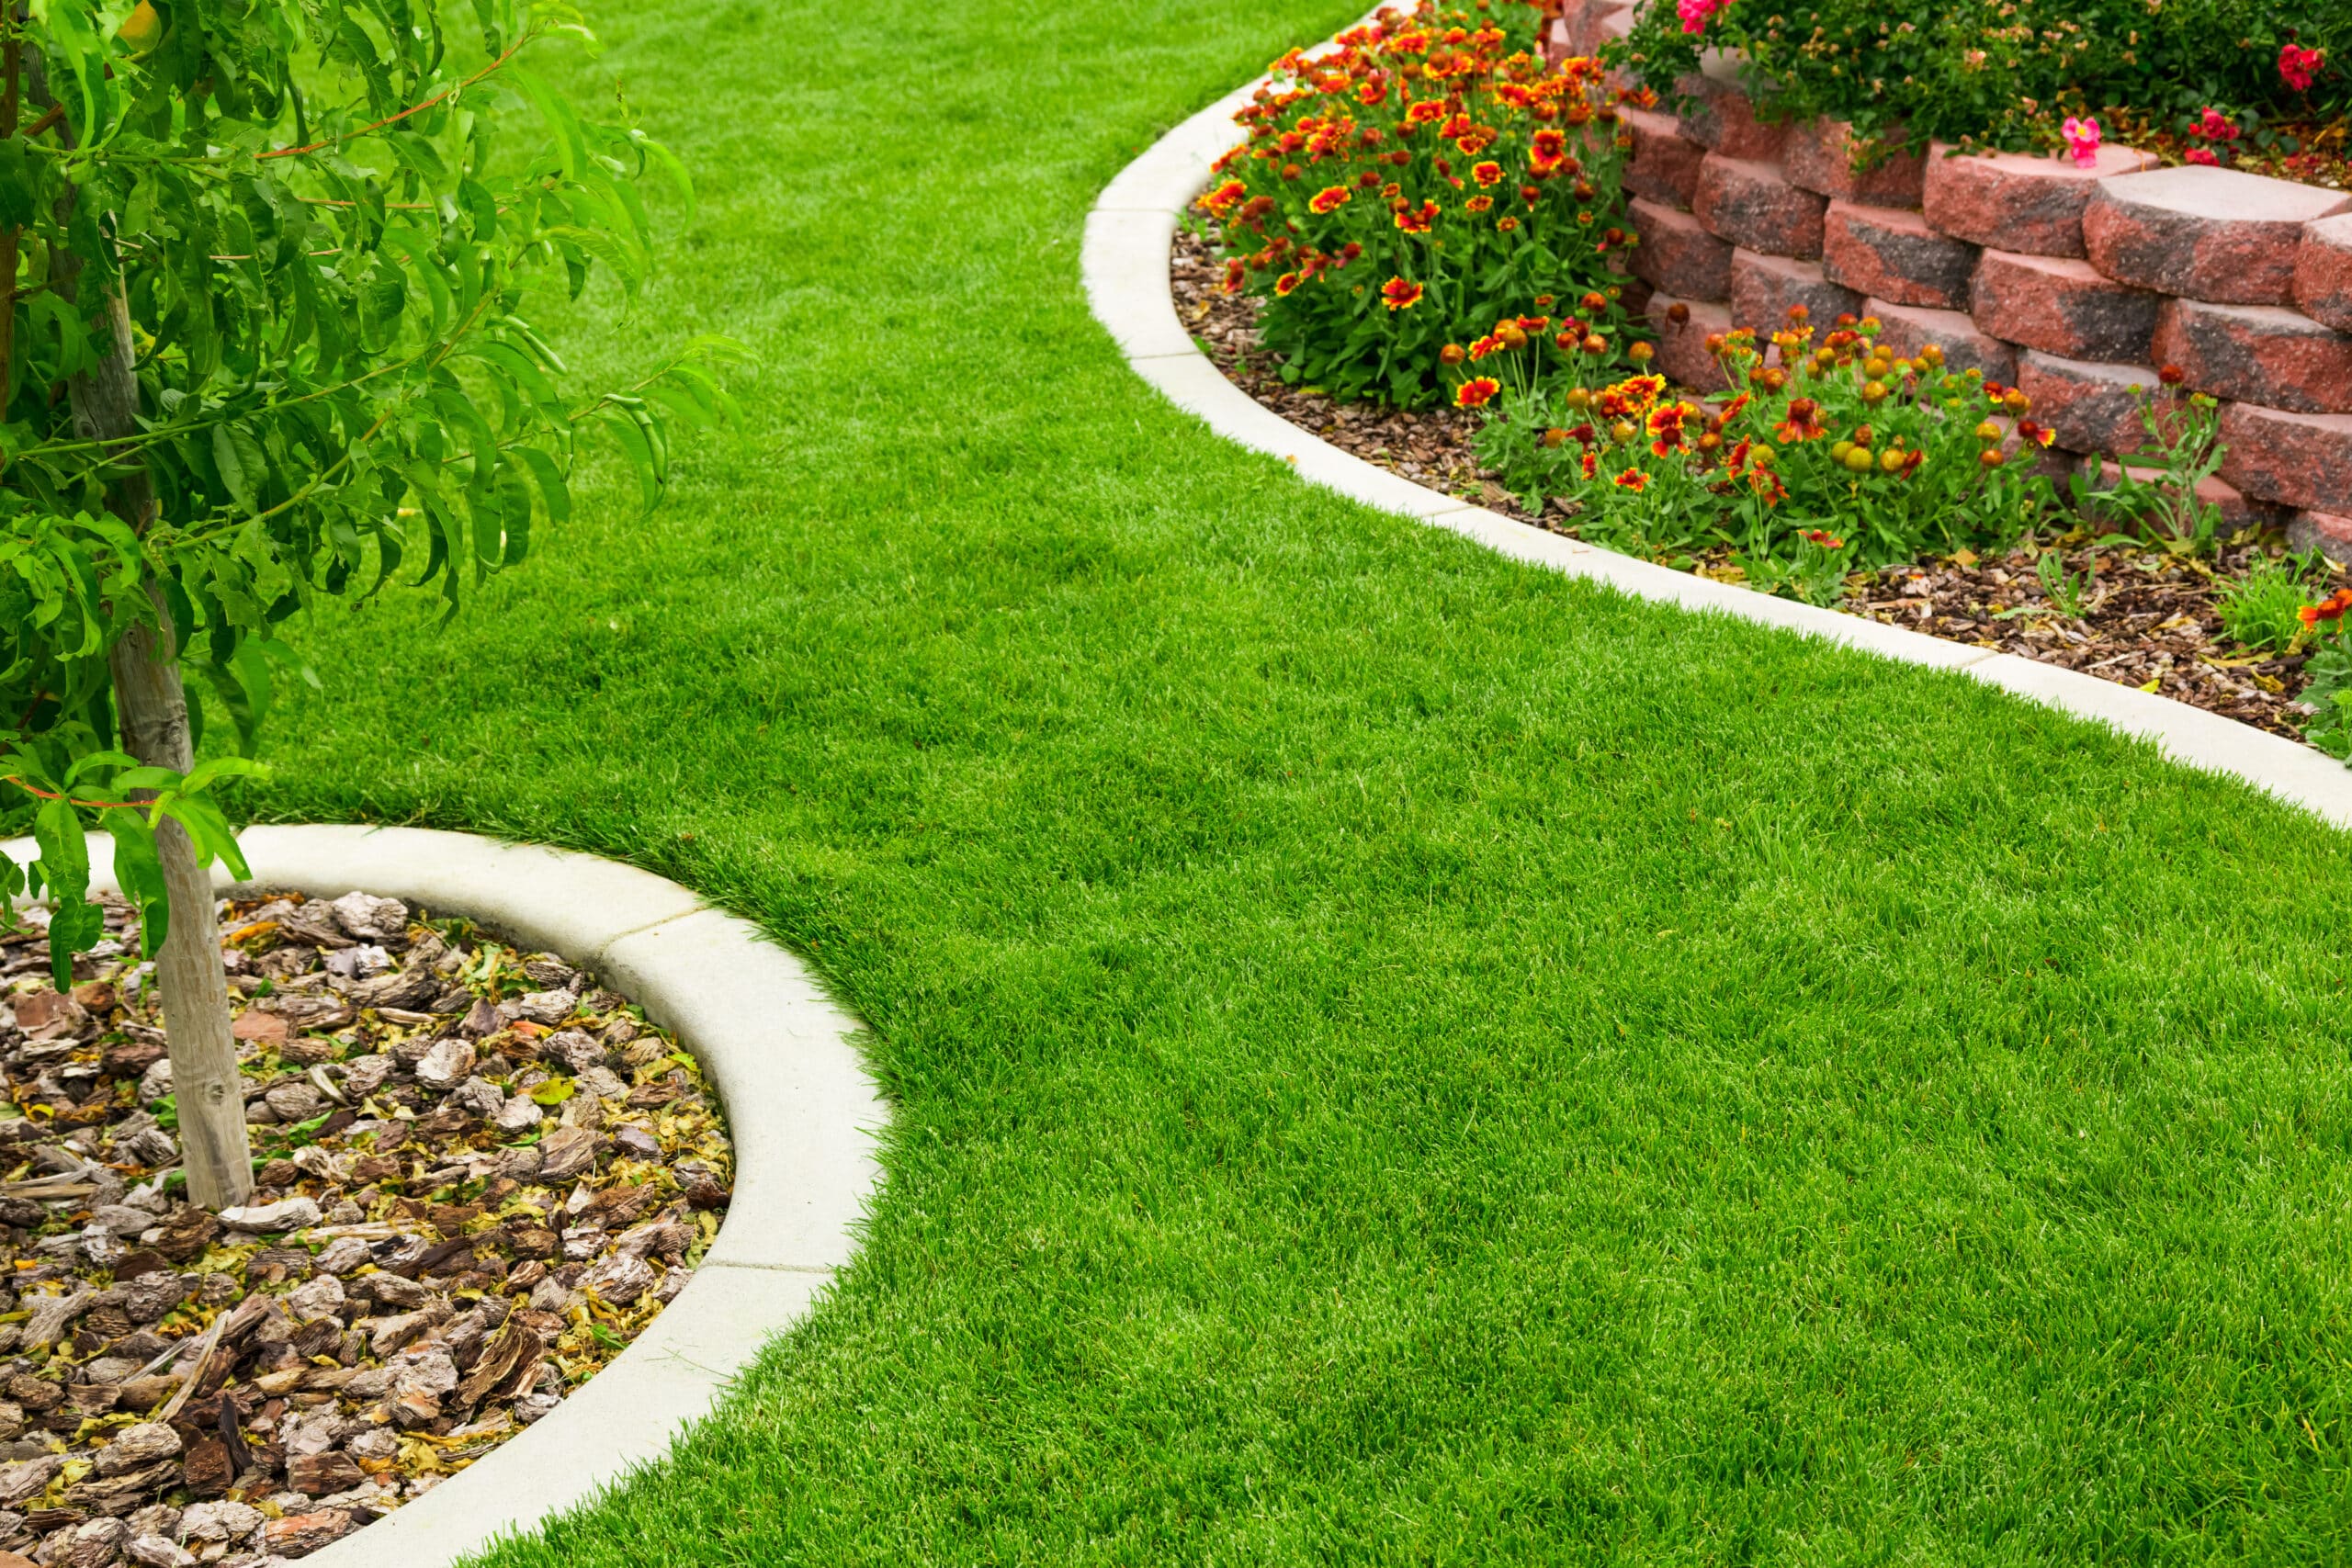 sod installation ads aesthetic appeal to your Westlake, TX, home